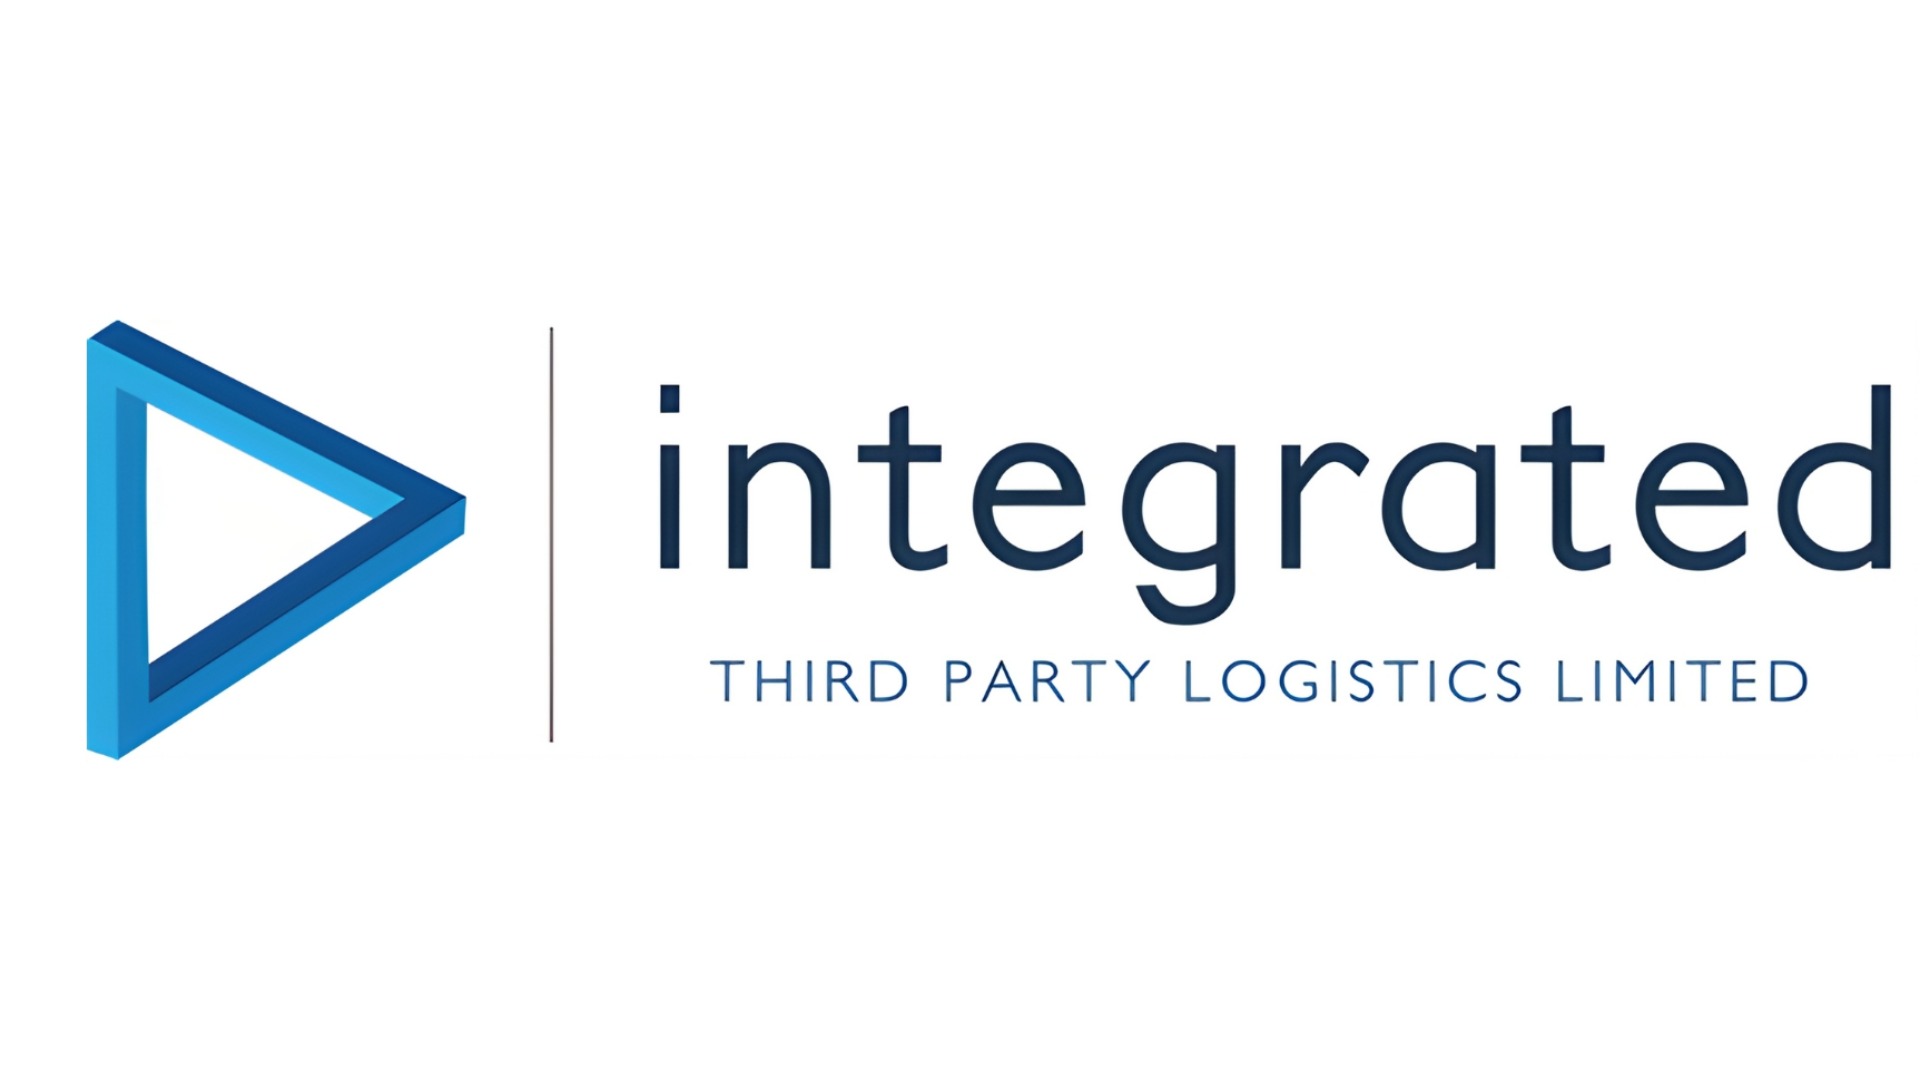 Integrated Third Party Logistics Limited